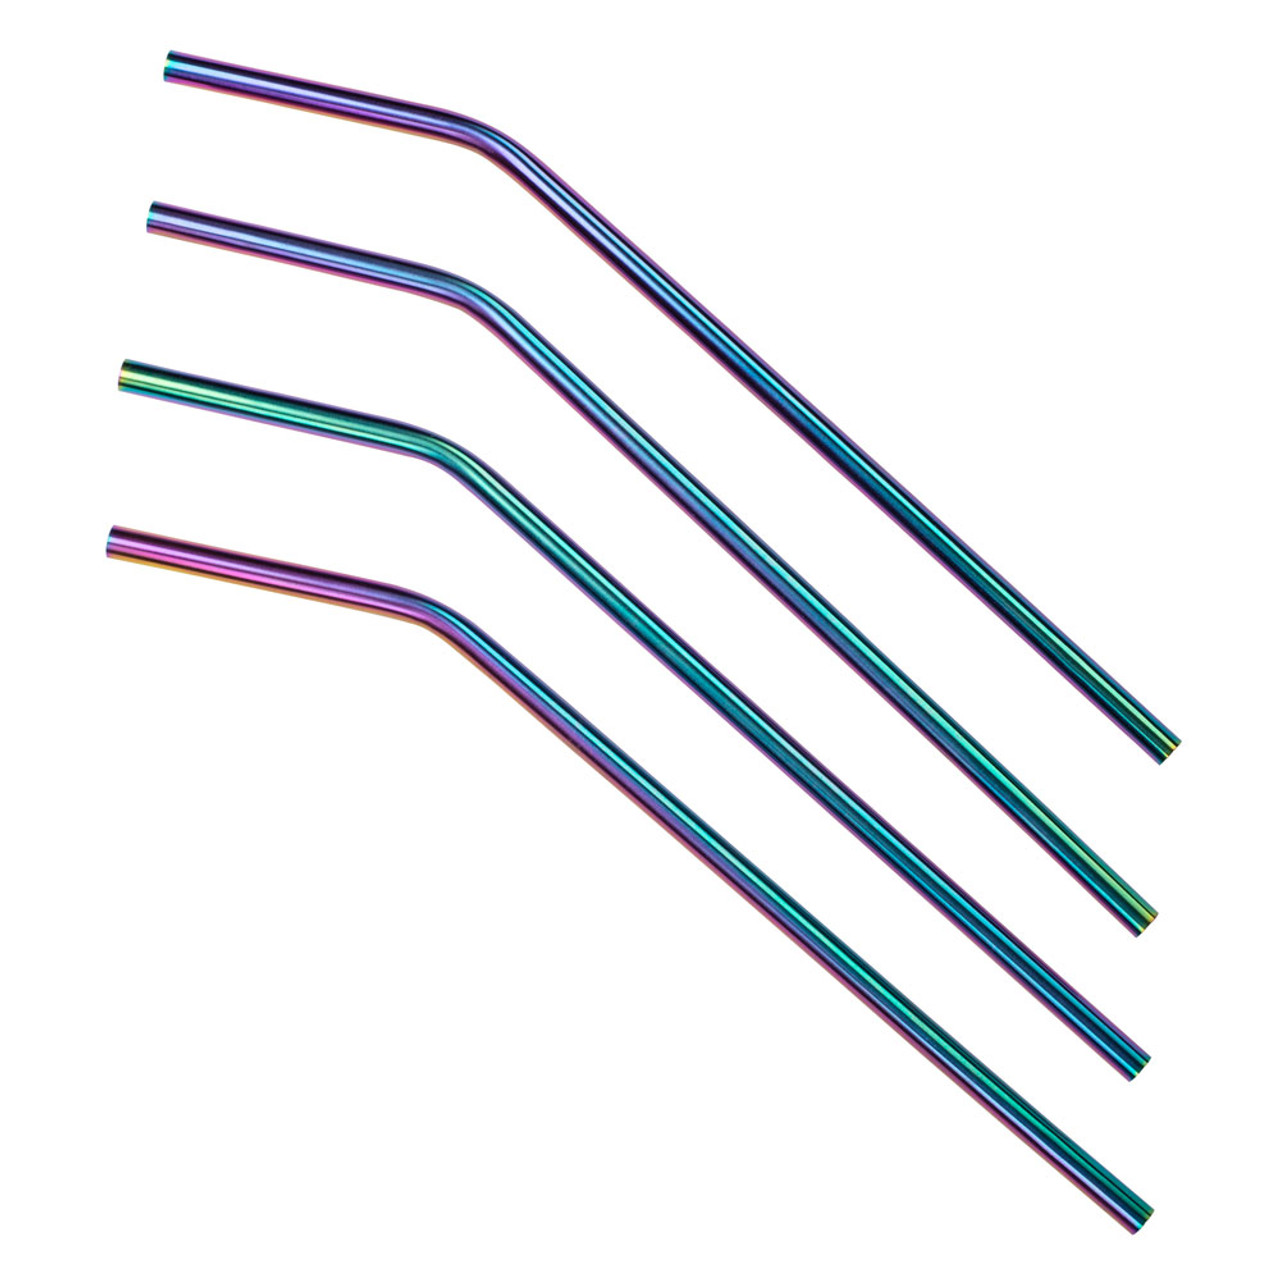 https://cdn11.bigcommerce.com/s-cznxq08r7/images/stencil/1280x1280/products/519/8397/rainbow-straw-set-4_845033088713_behind_the_bar_stainless_steel_drinking_straw_4_rainbow_03__33094.1590771946.jpg?c=1